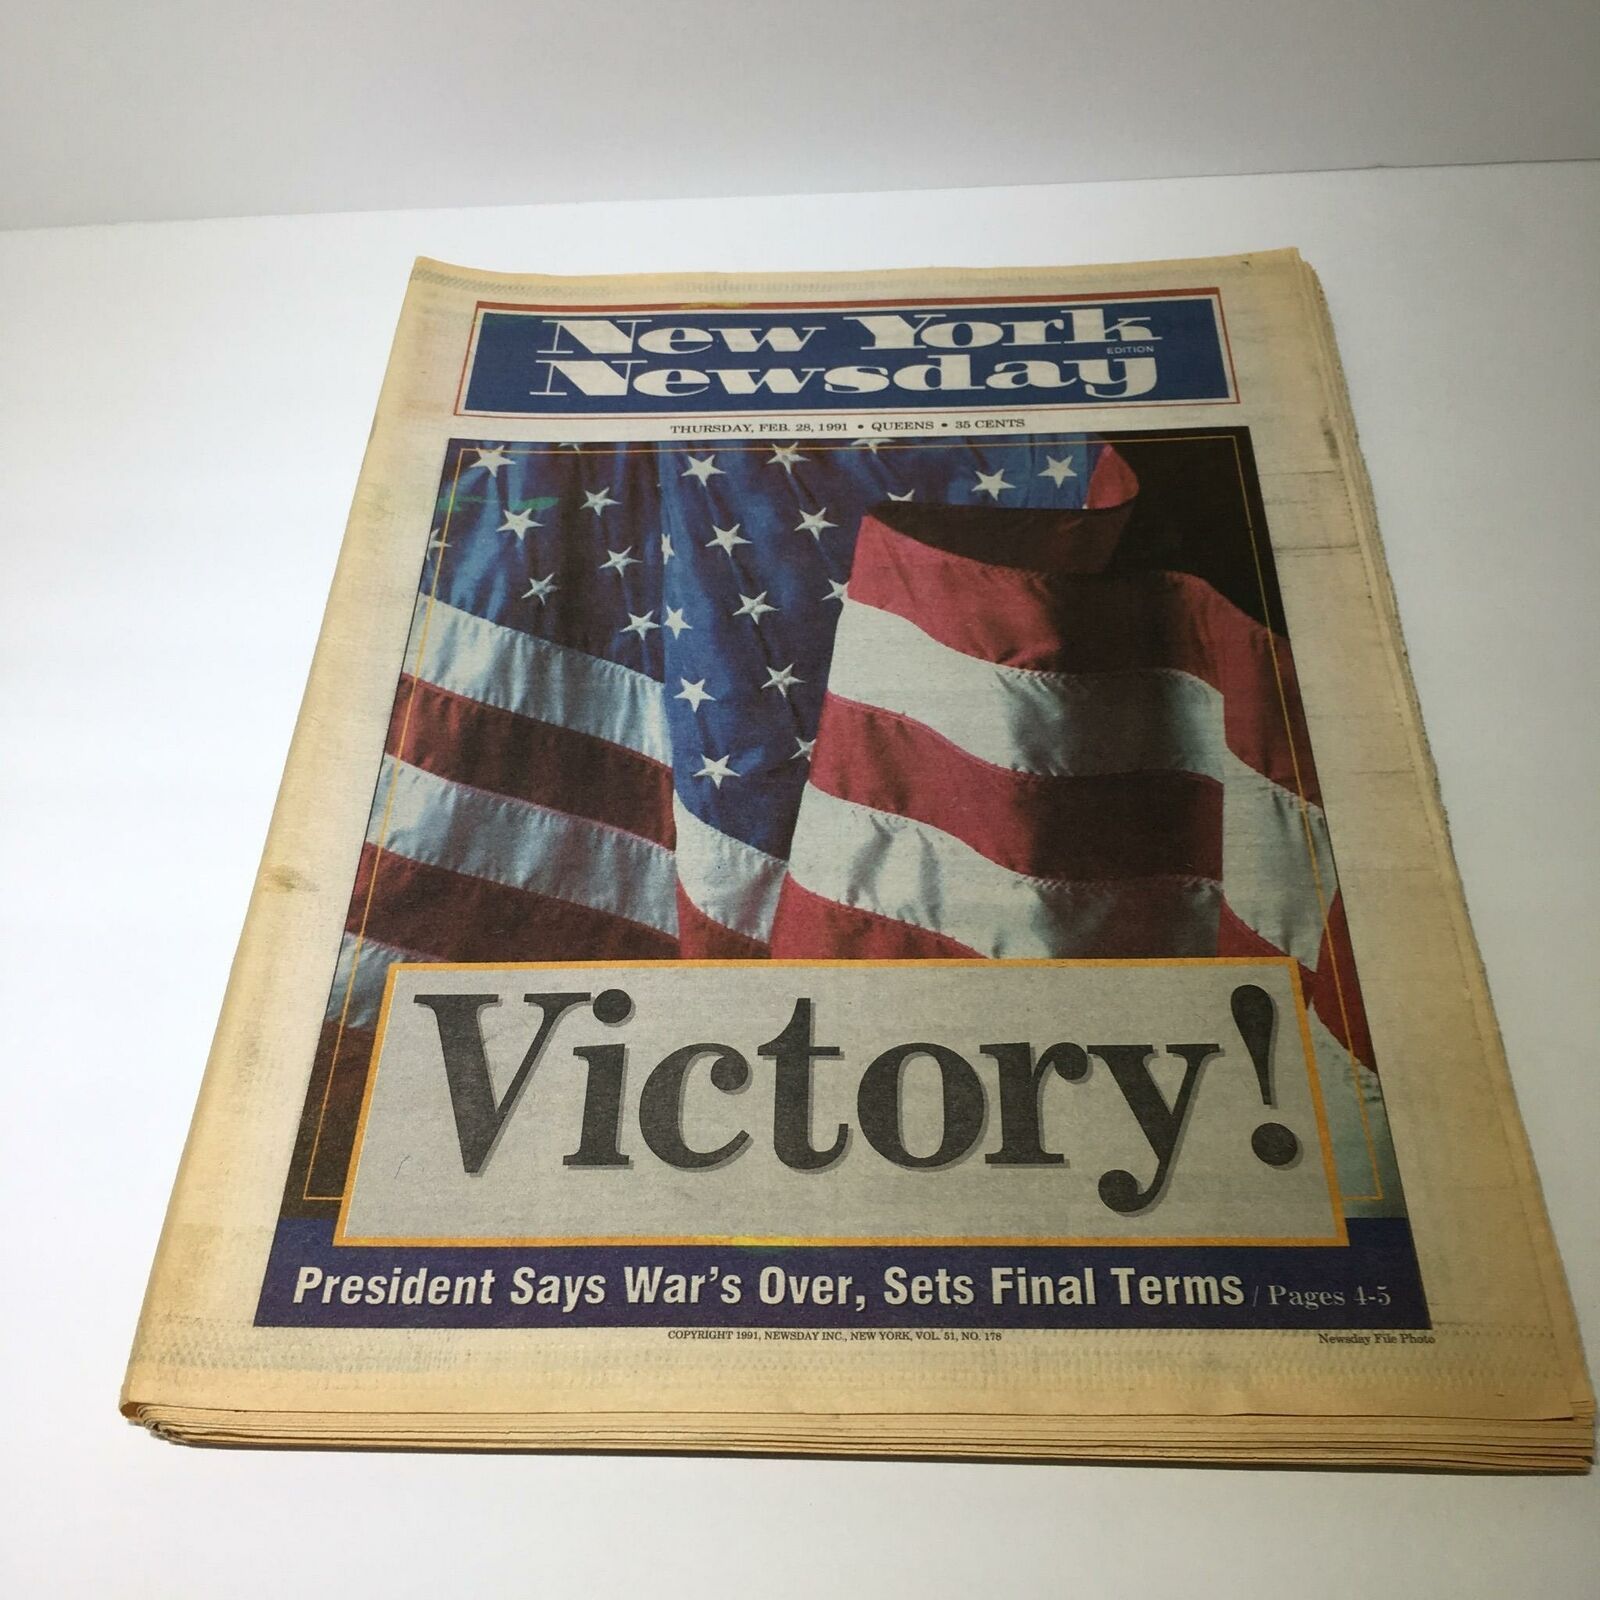 Primary image for Newsday: Feb 28 1991 Victory! President Says War's Over, Sets Final Terms